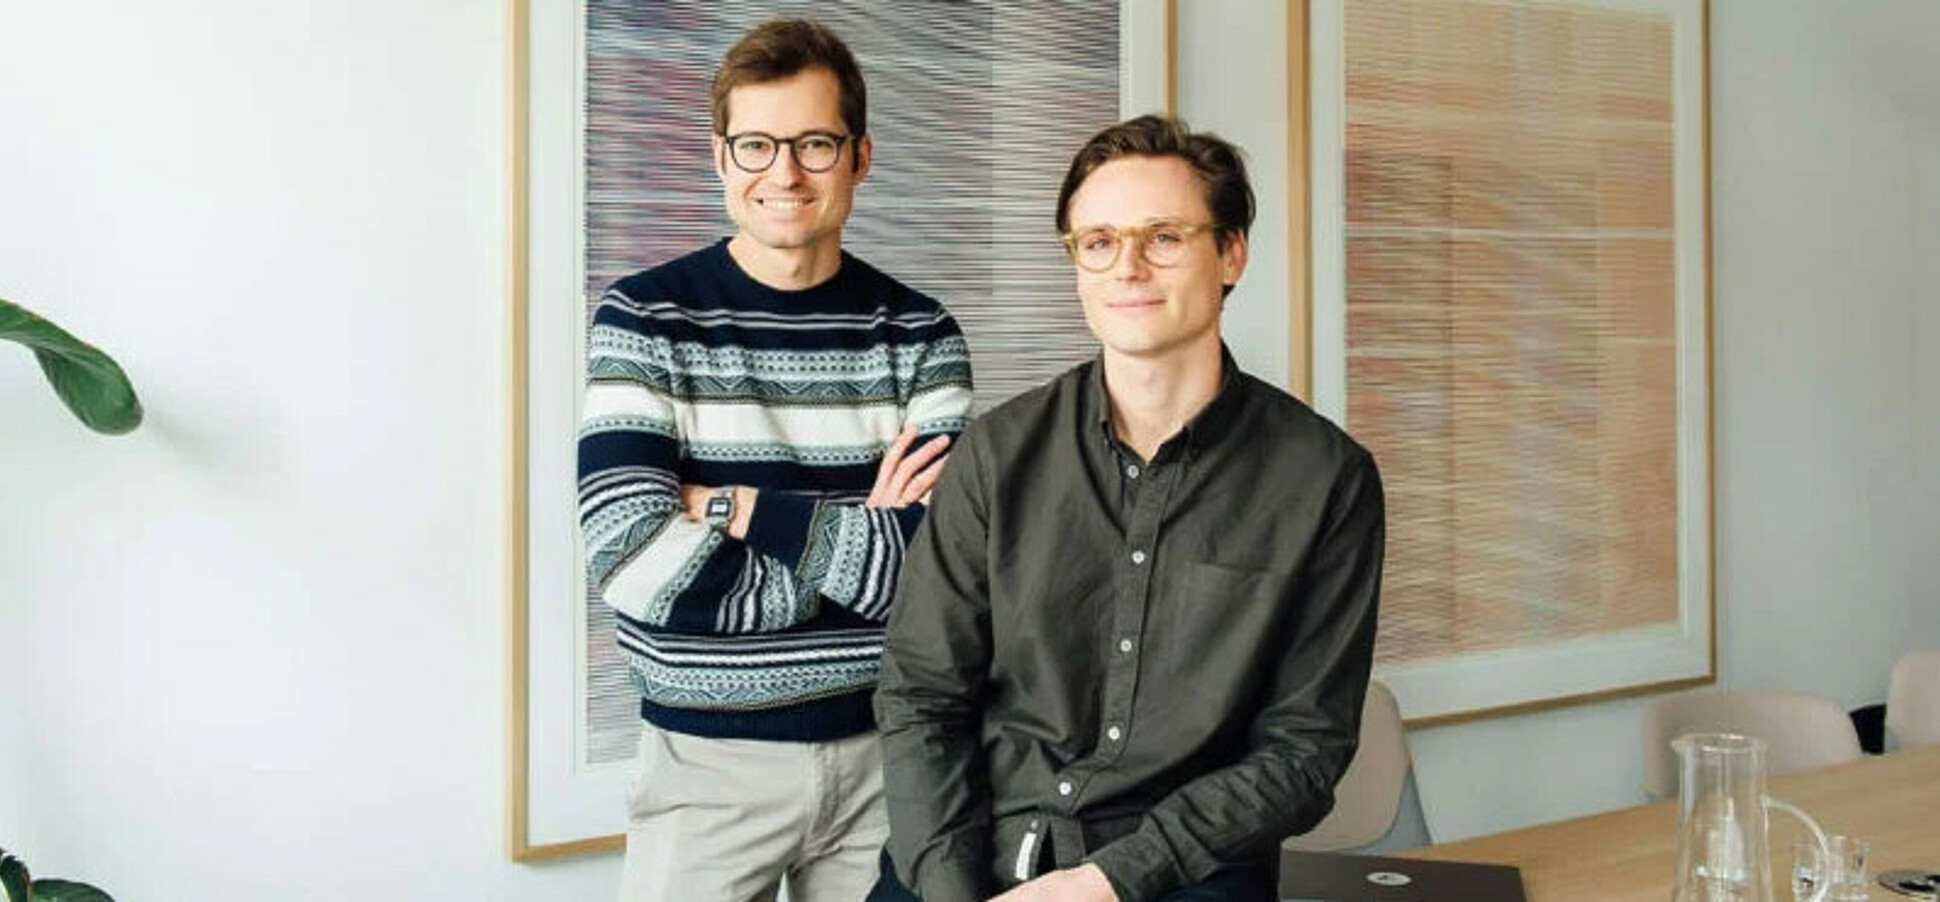 Maximilian Eber (l.) and Maik Taro Wehmeyer founded Taktile in 2020.